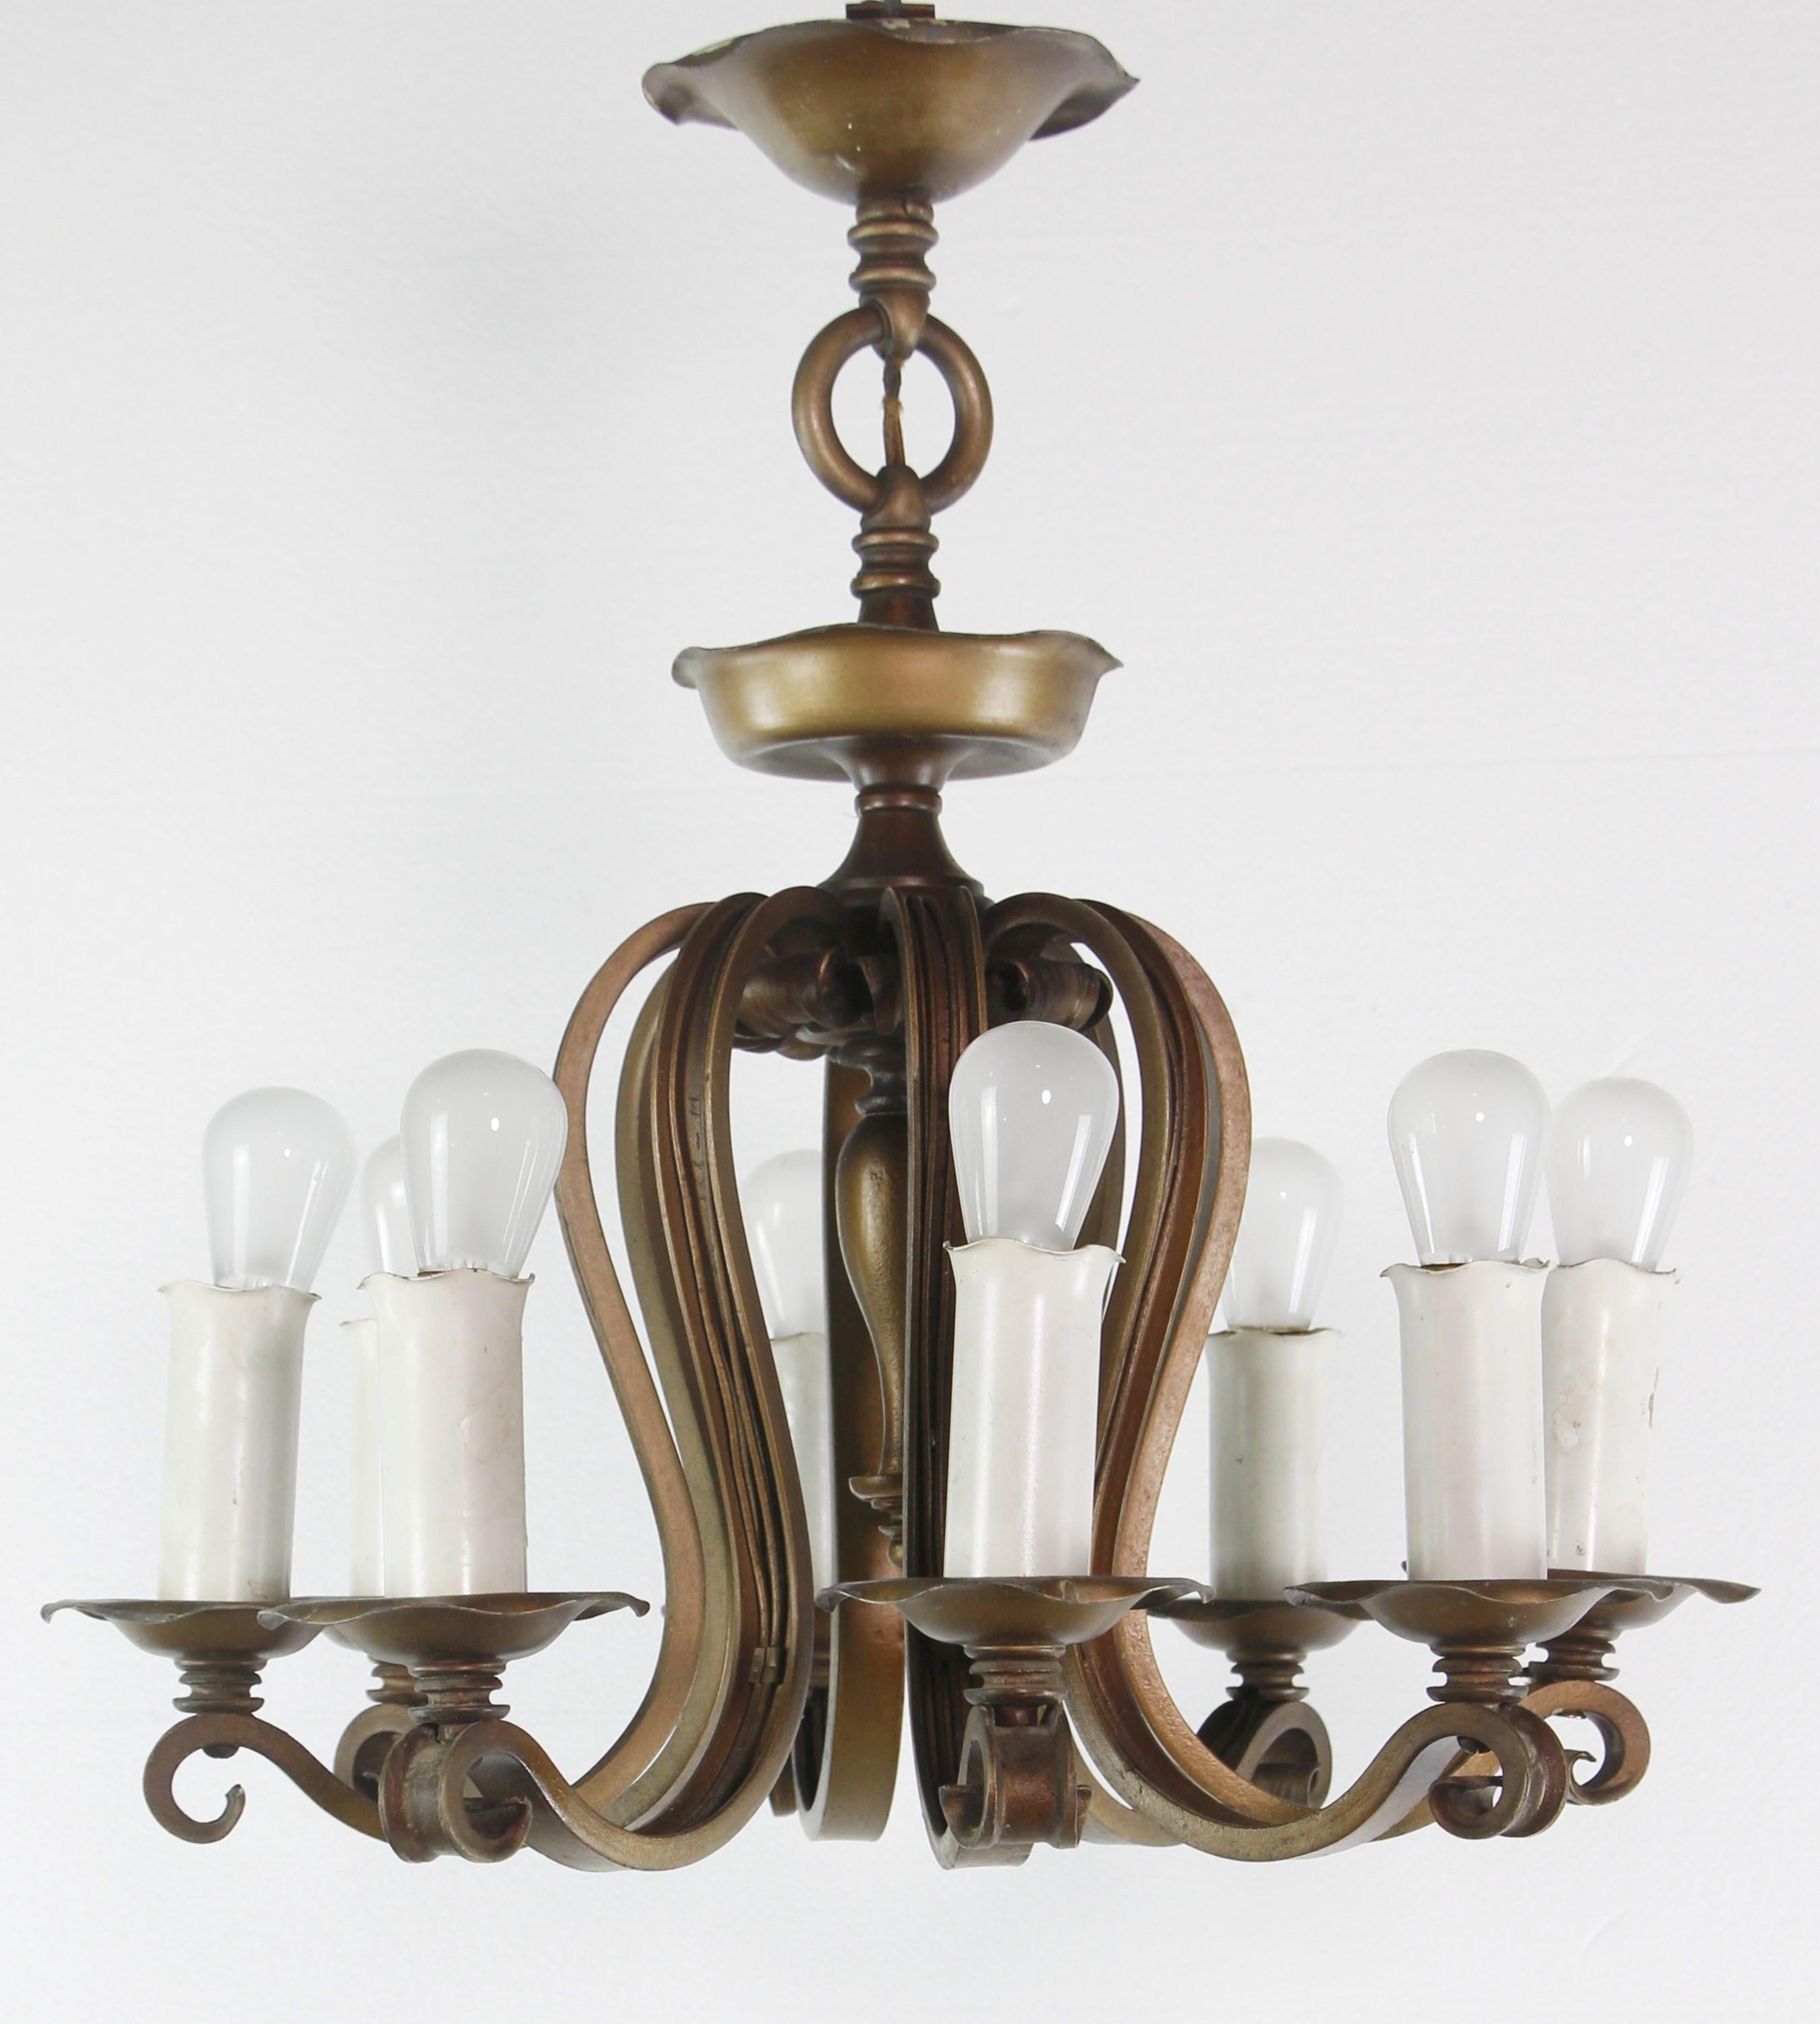 Antique hand hammered bronze and iron eight light chandelier. Cleaned and restored. Takes eight medium base light bulbs. Please note, this item is located in our Scranton, PA location.